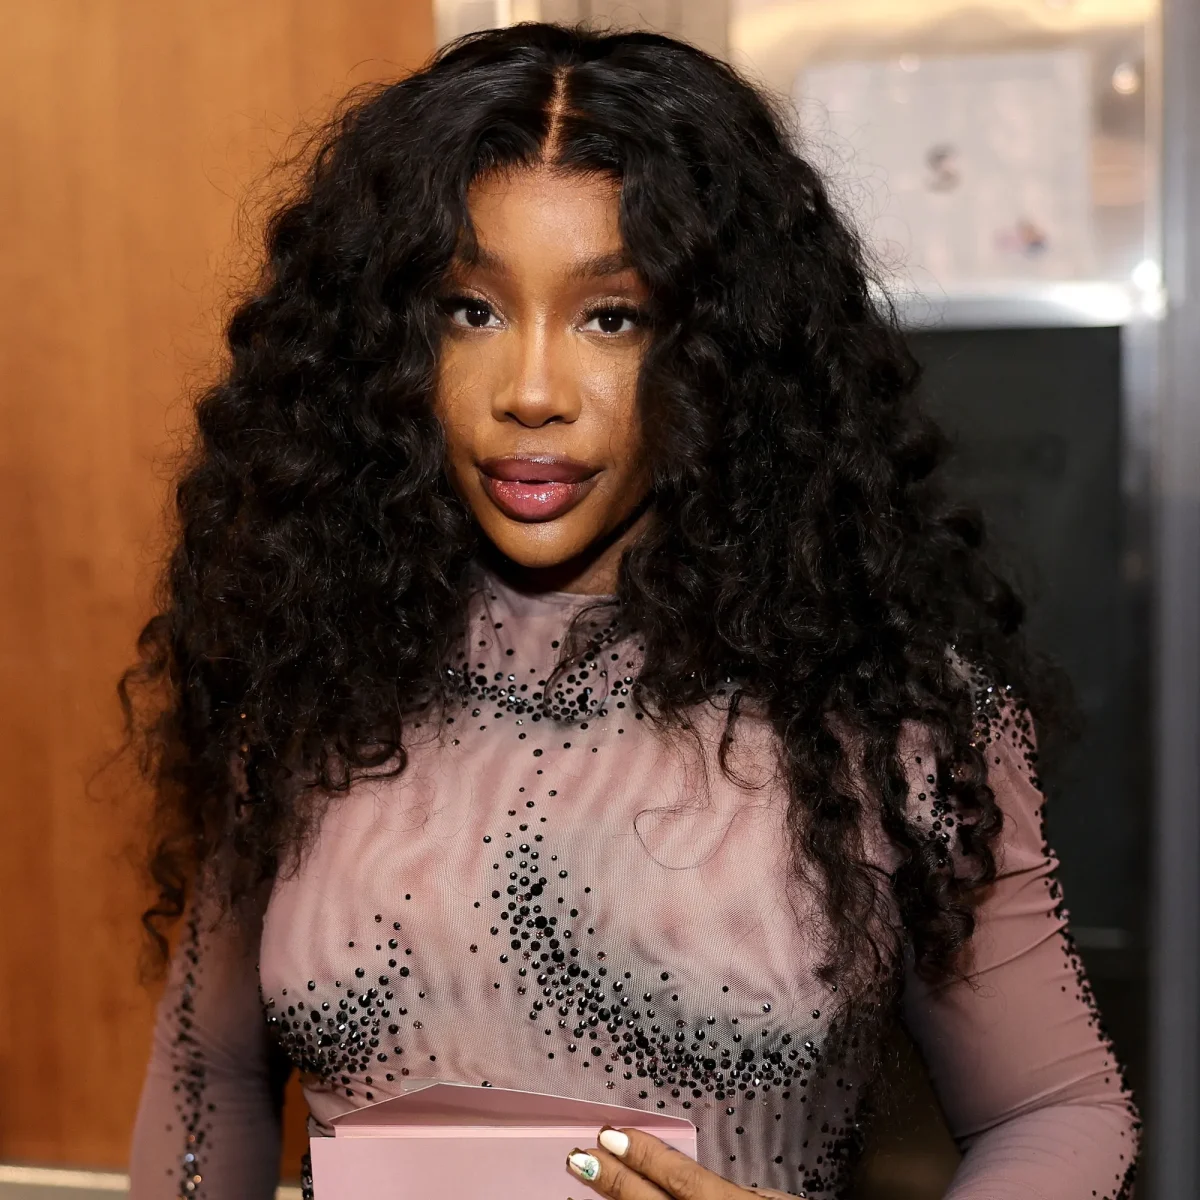 Sza Reacts To Fans' Unruly Behavior At Her Aussie Concert 9